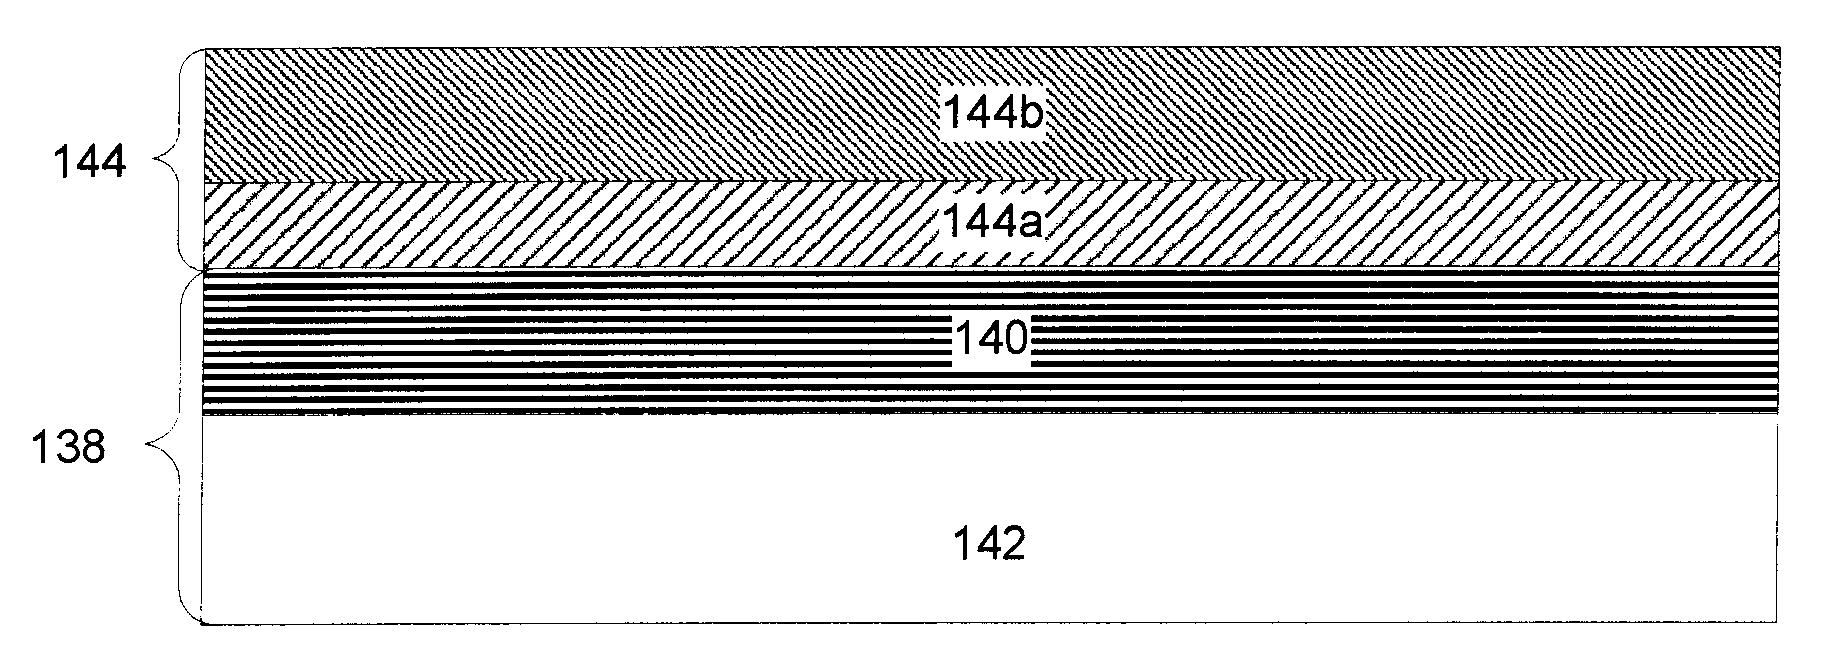 Barrier coating deposition for thin film devices using plasma enhanced chemical vapor deposition process